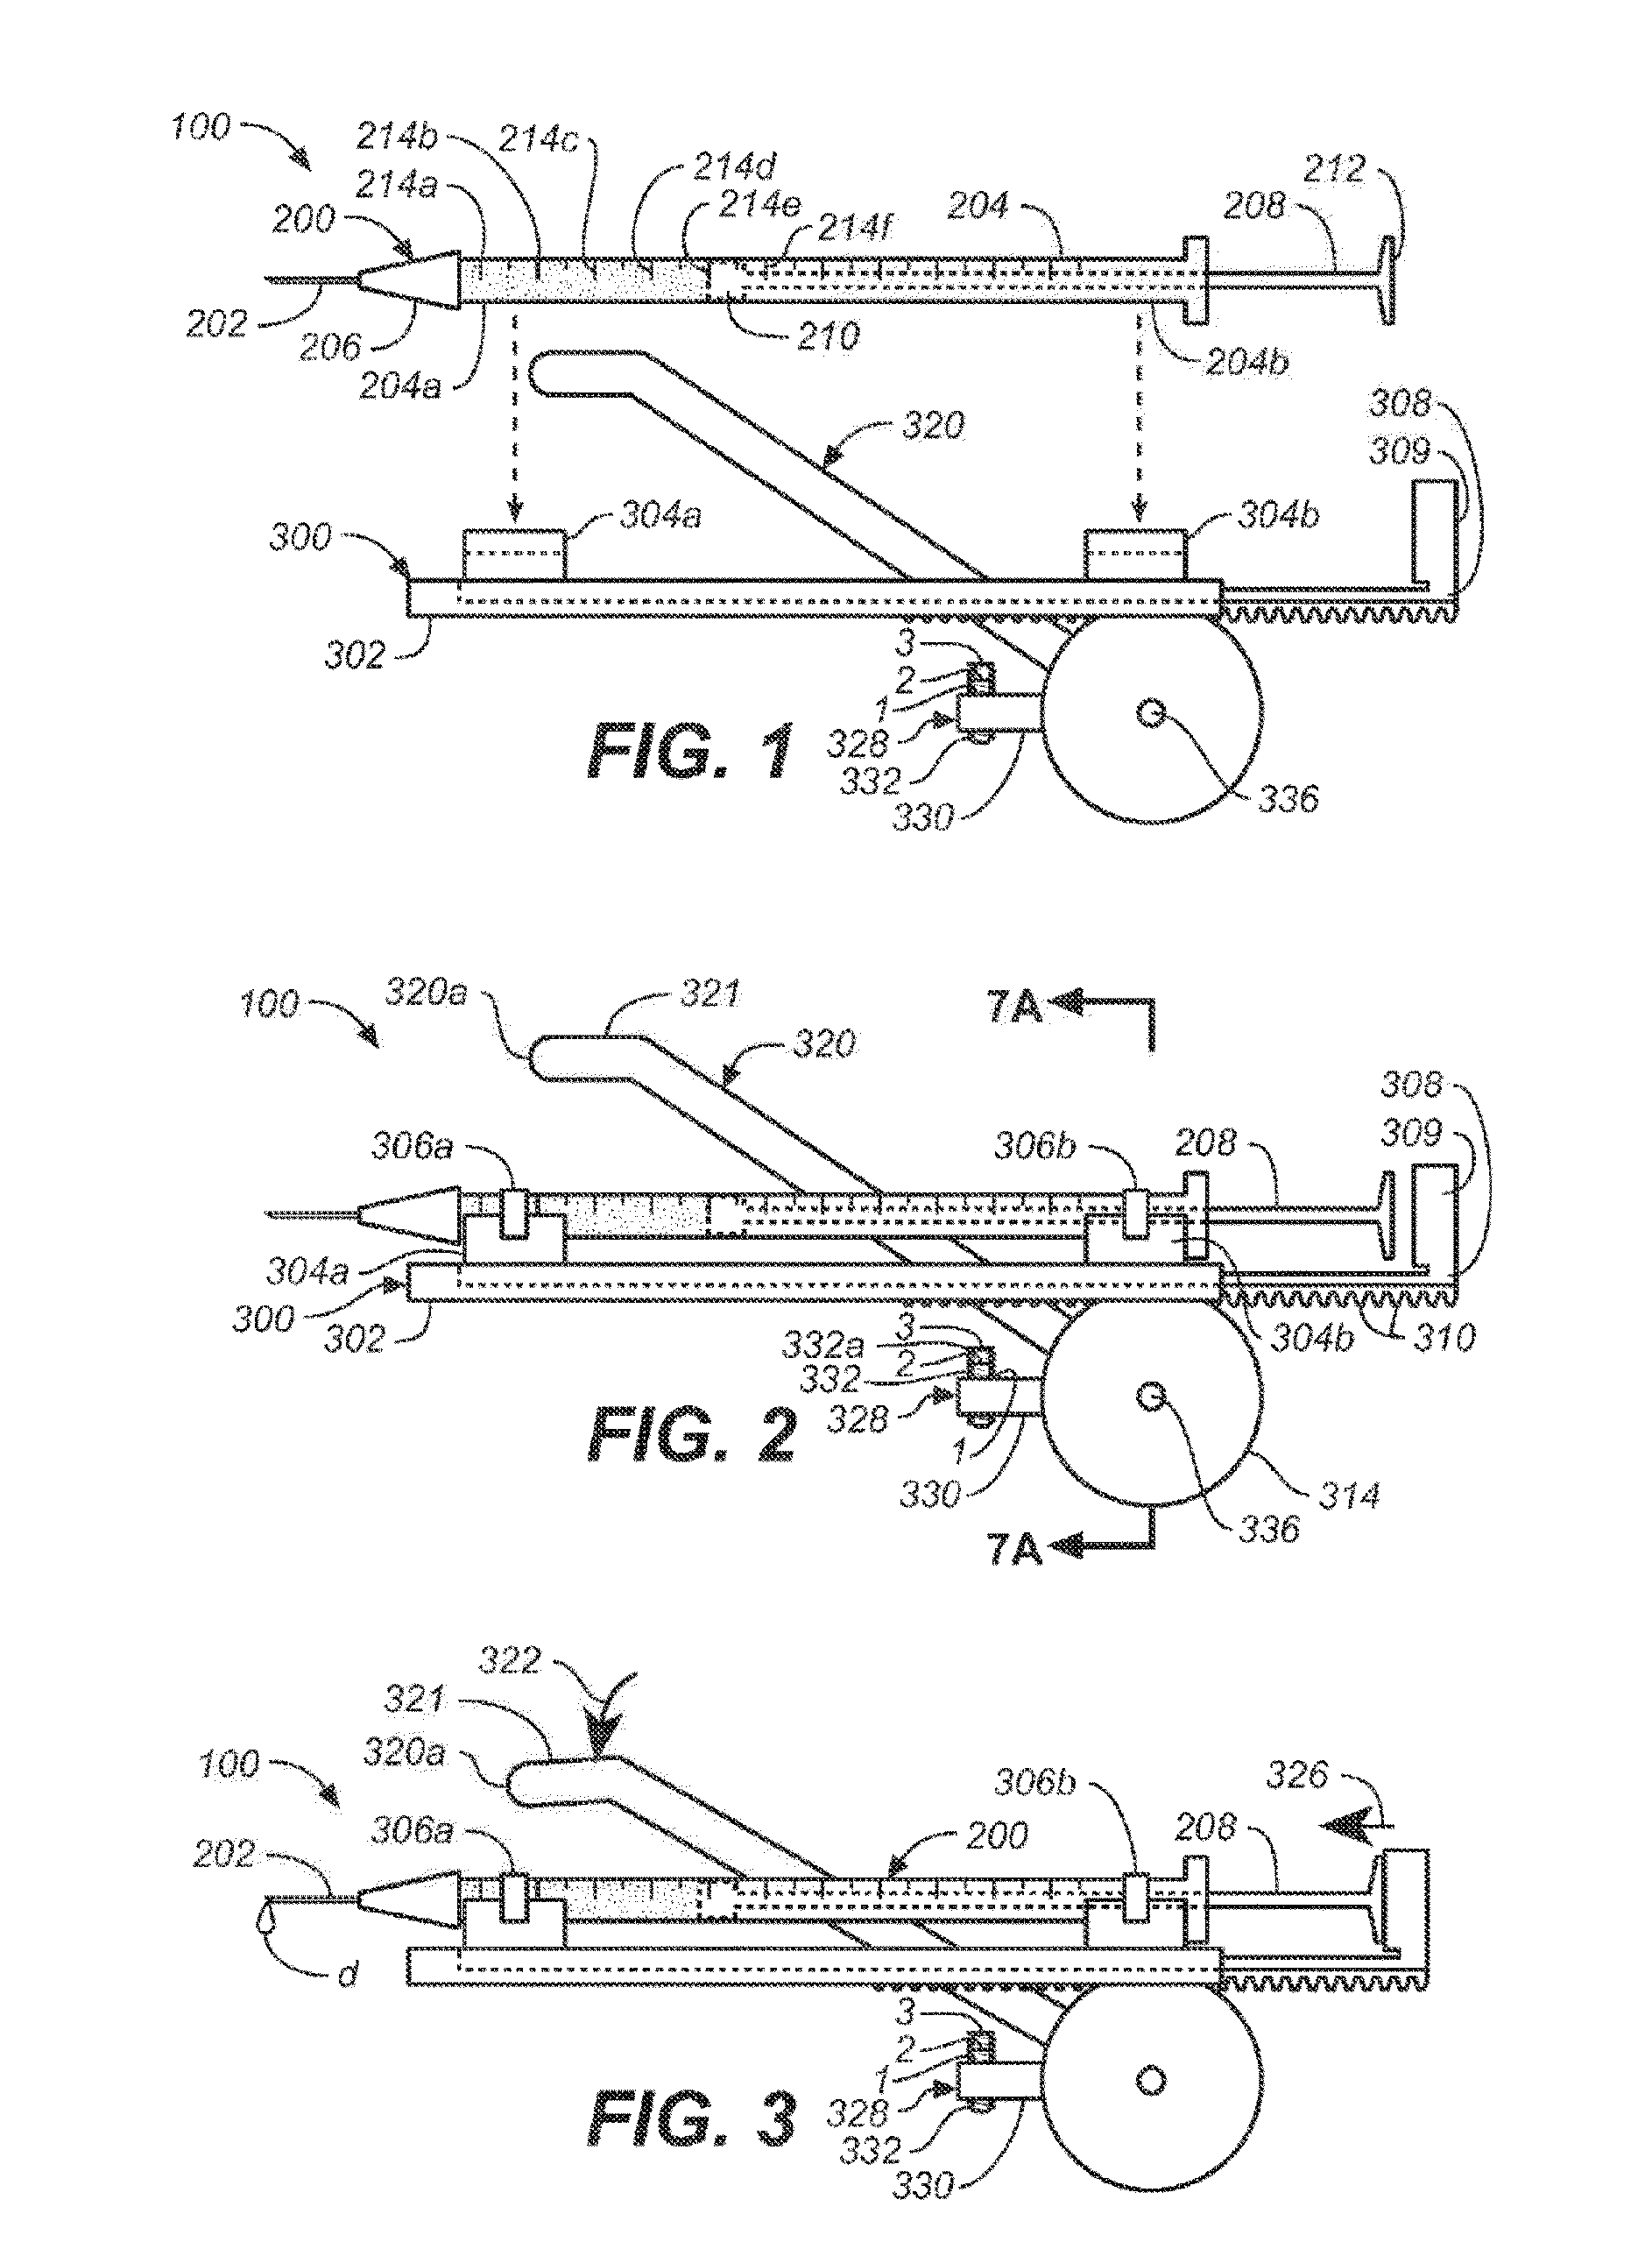 Handheld medical substance dispensing system, apparatus and methods